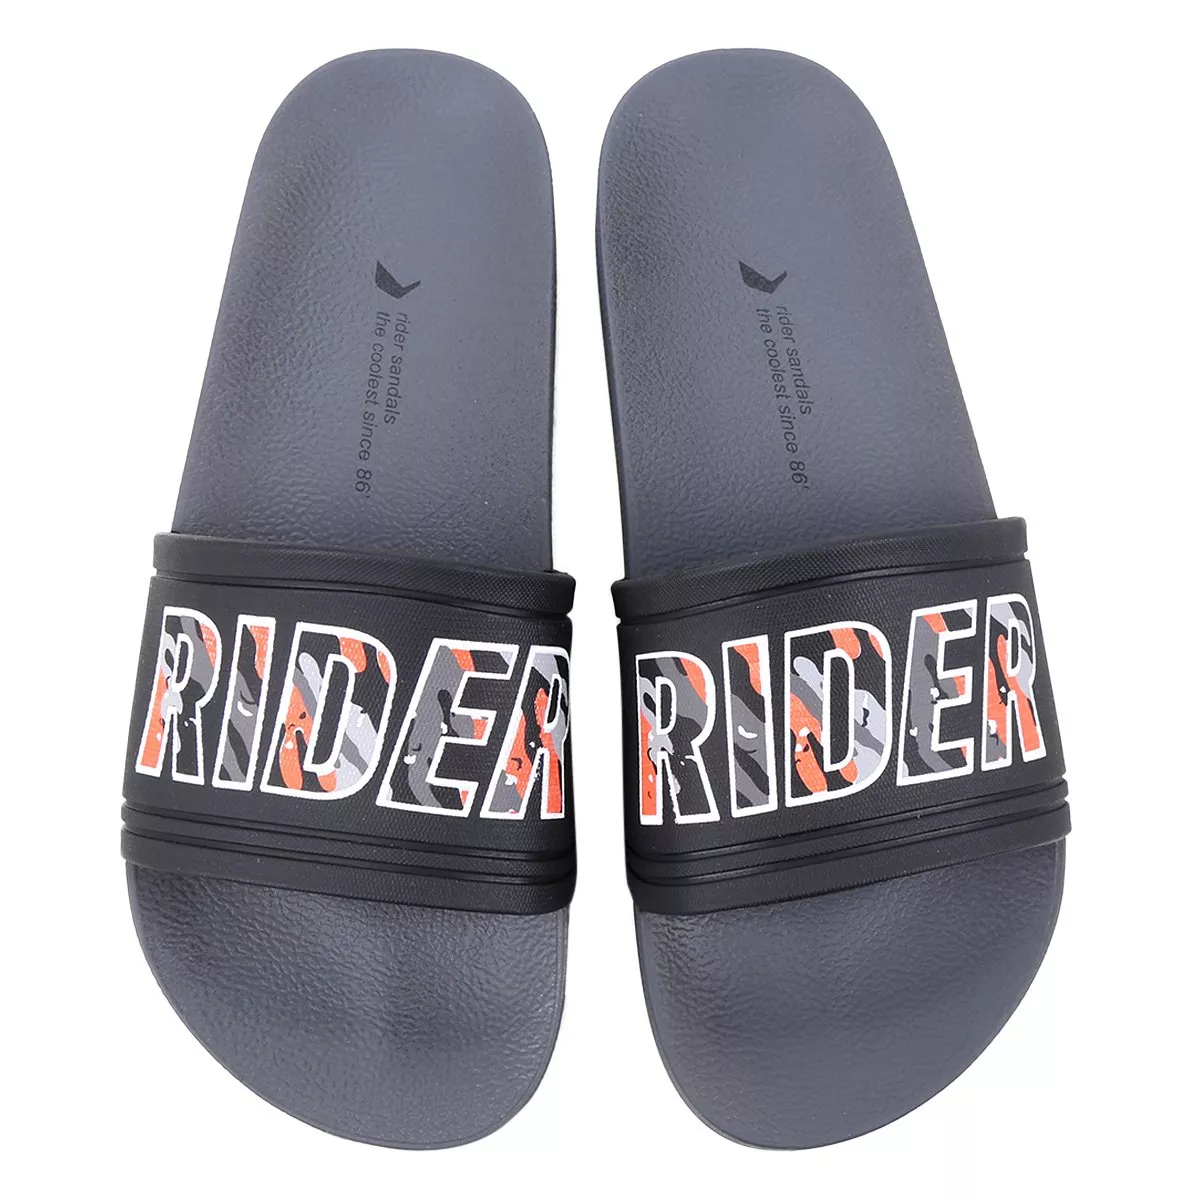 Chinelo Slide Rider Full 86 Special